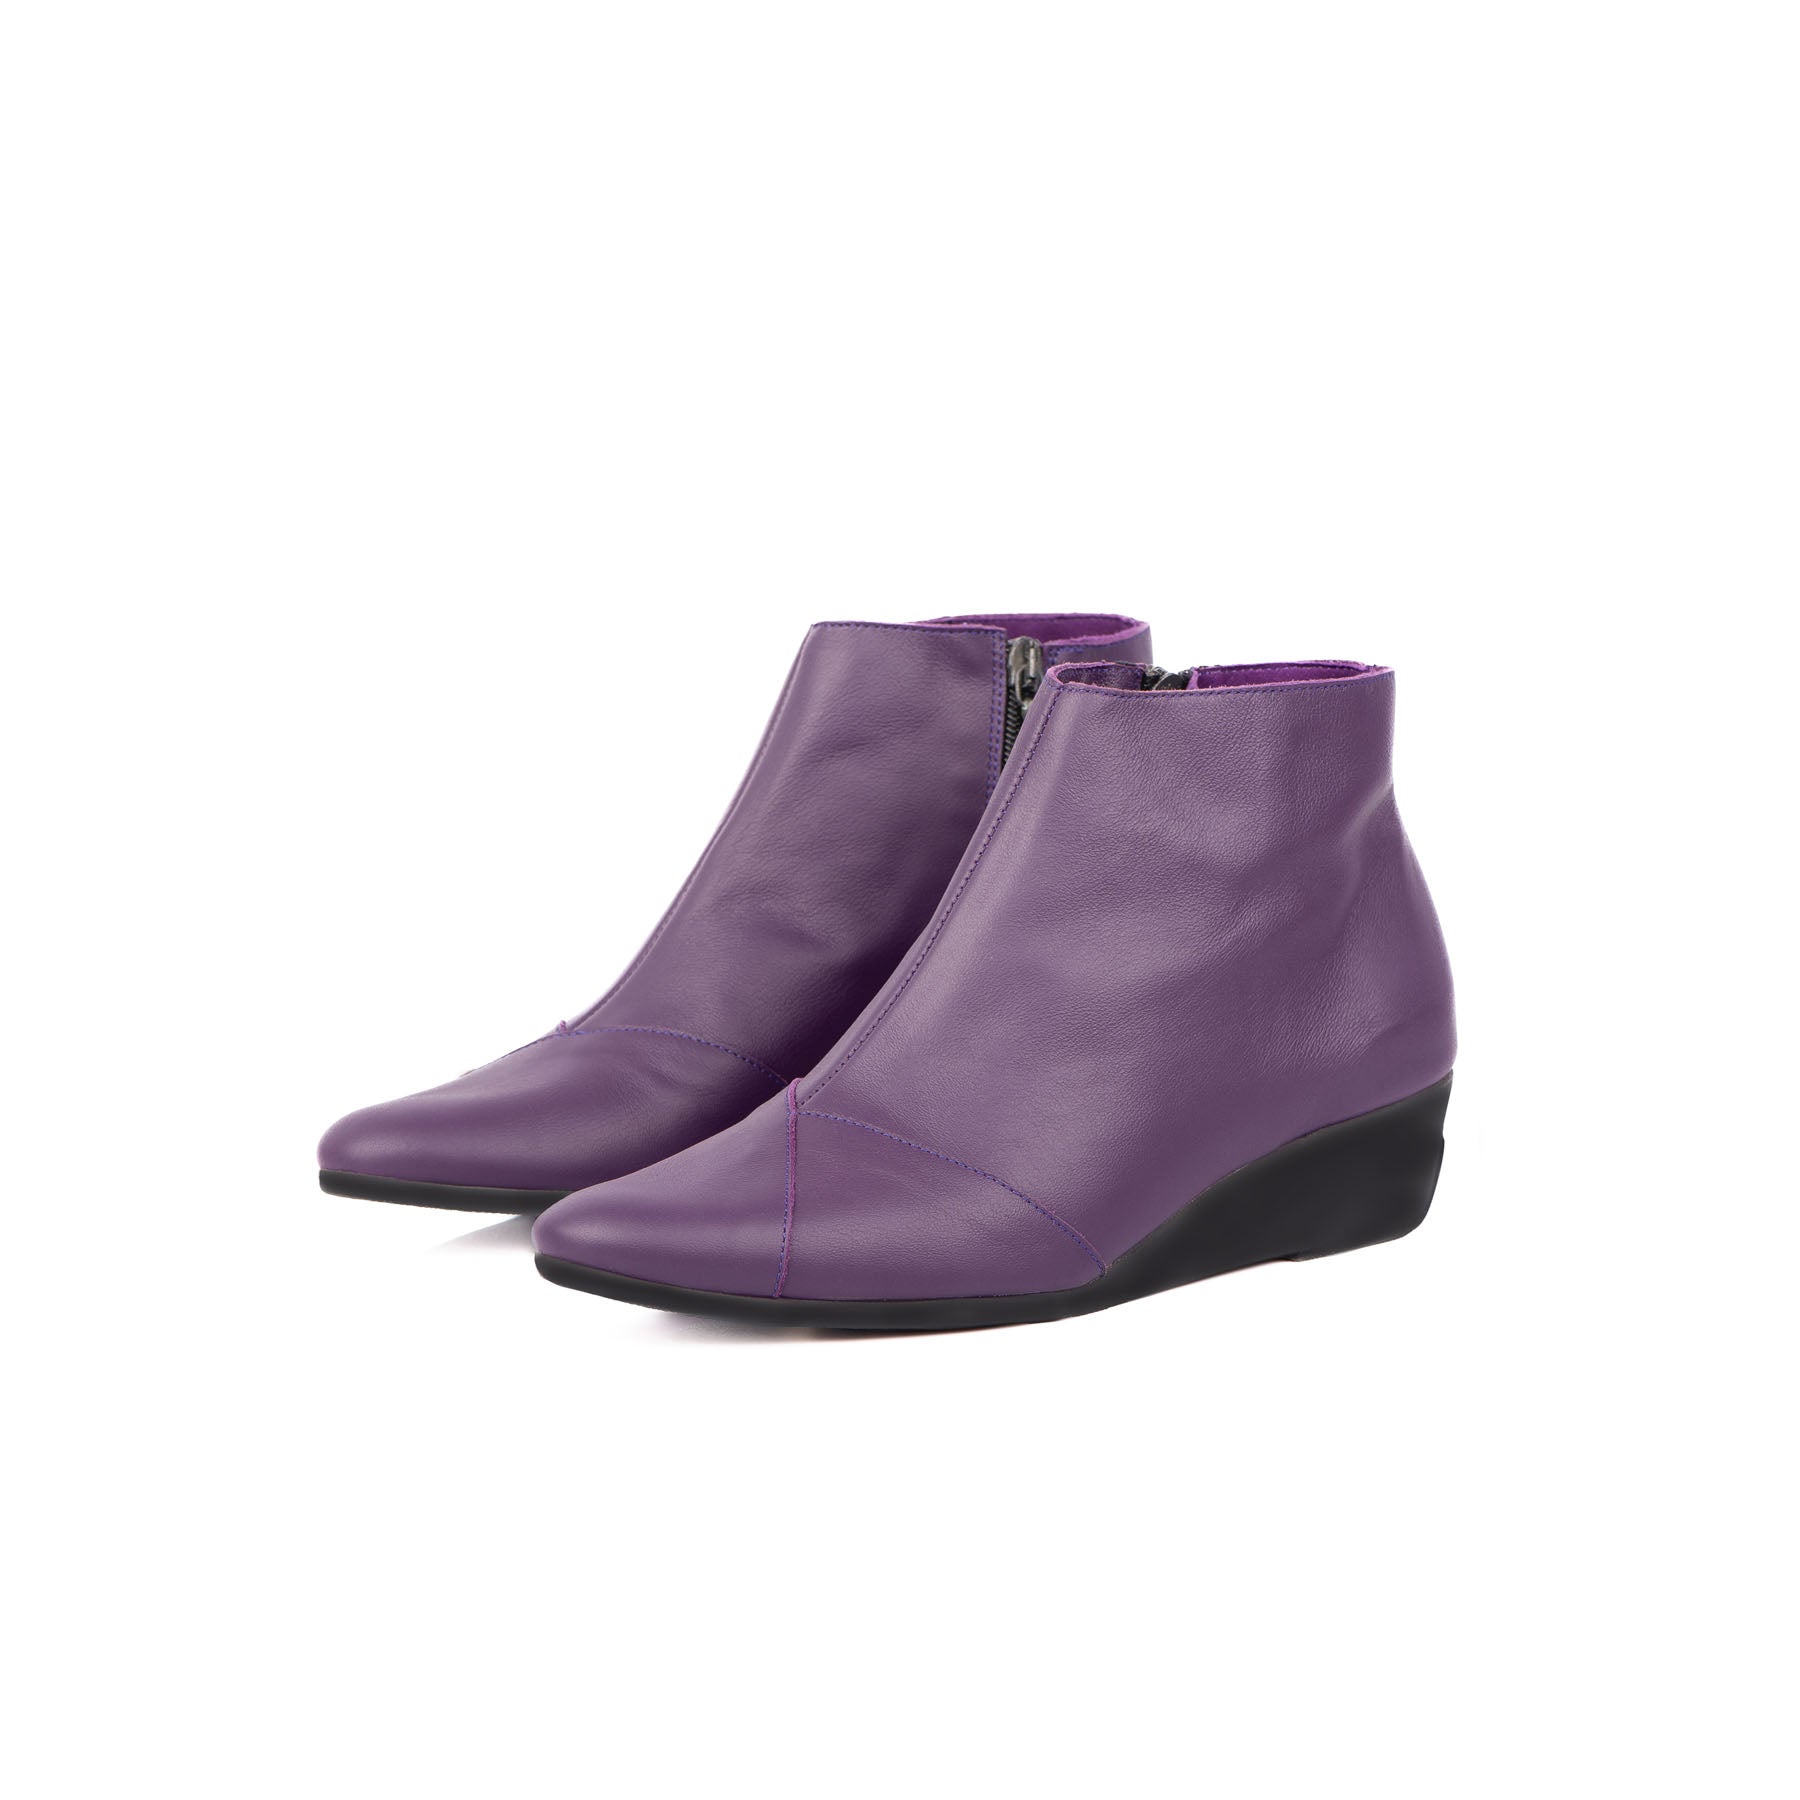 Chic & Simple Arche Ankle Boots Anyska - Muscari